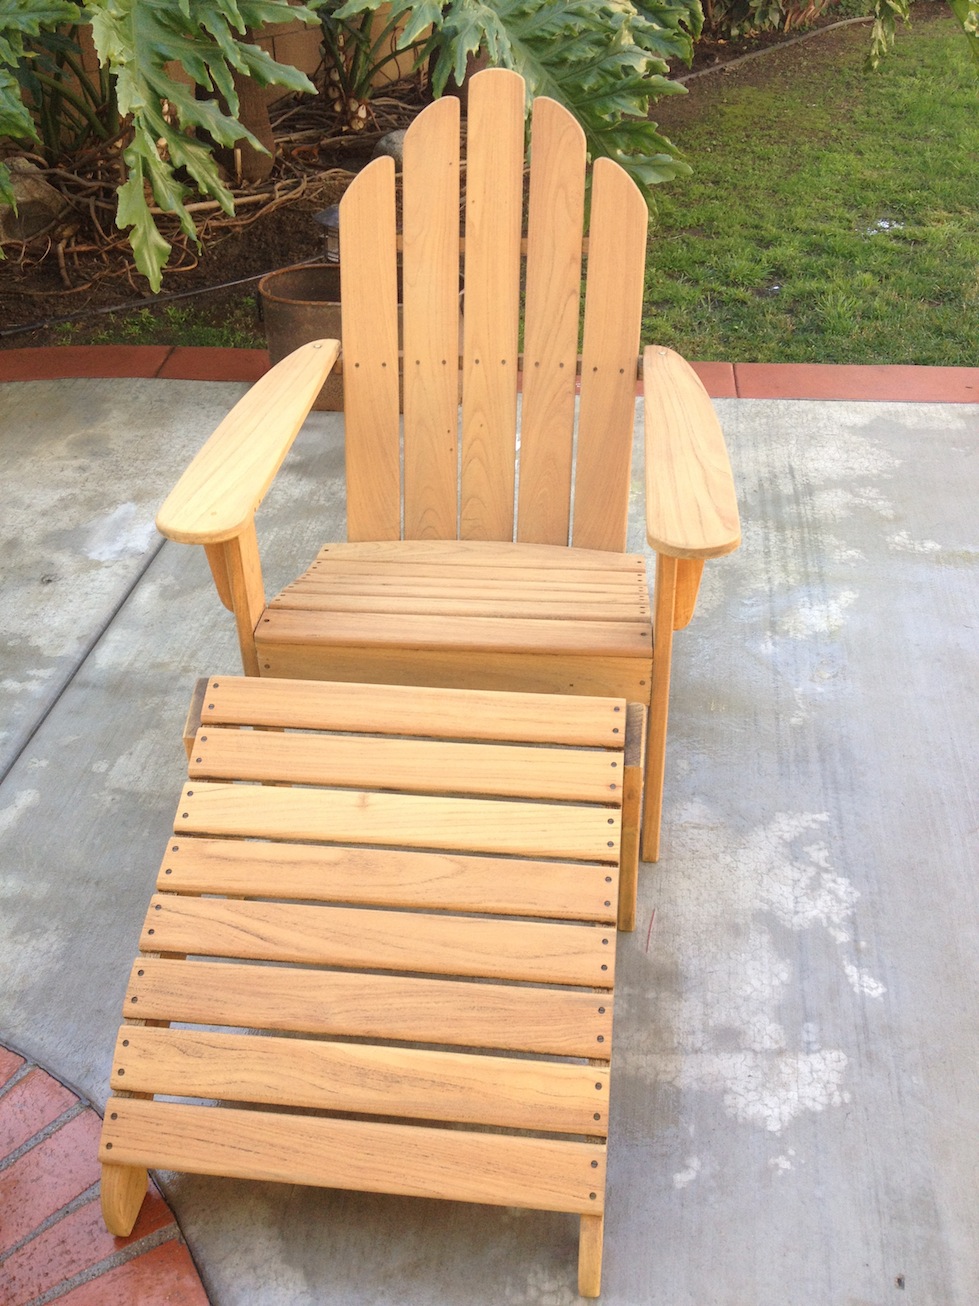 Teak bench refinished in Ladera Ranch